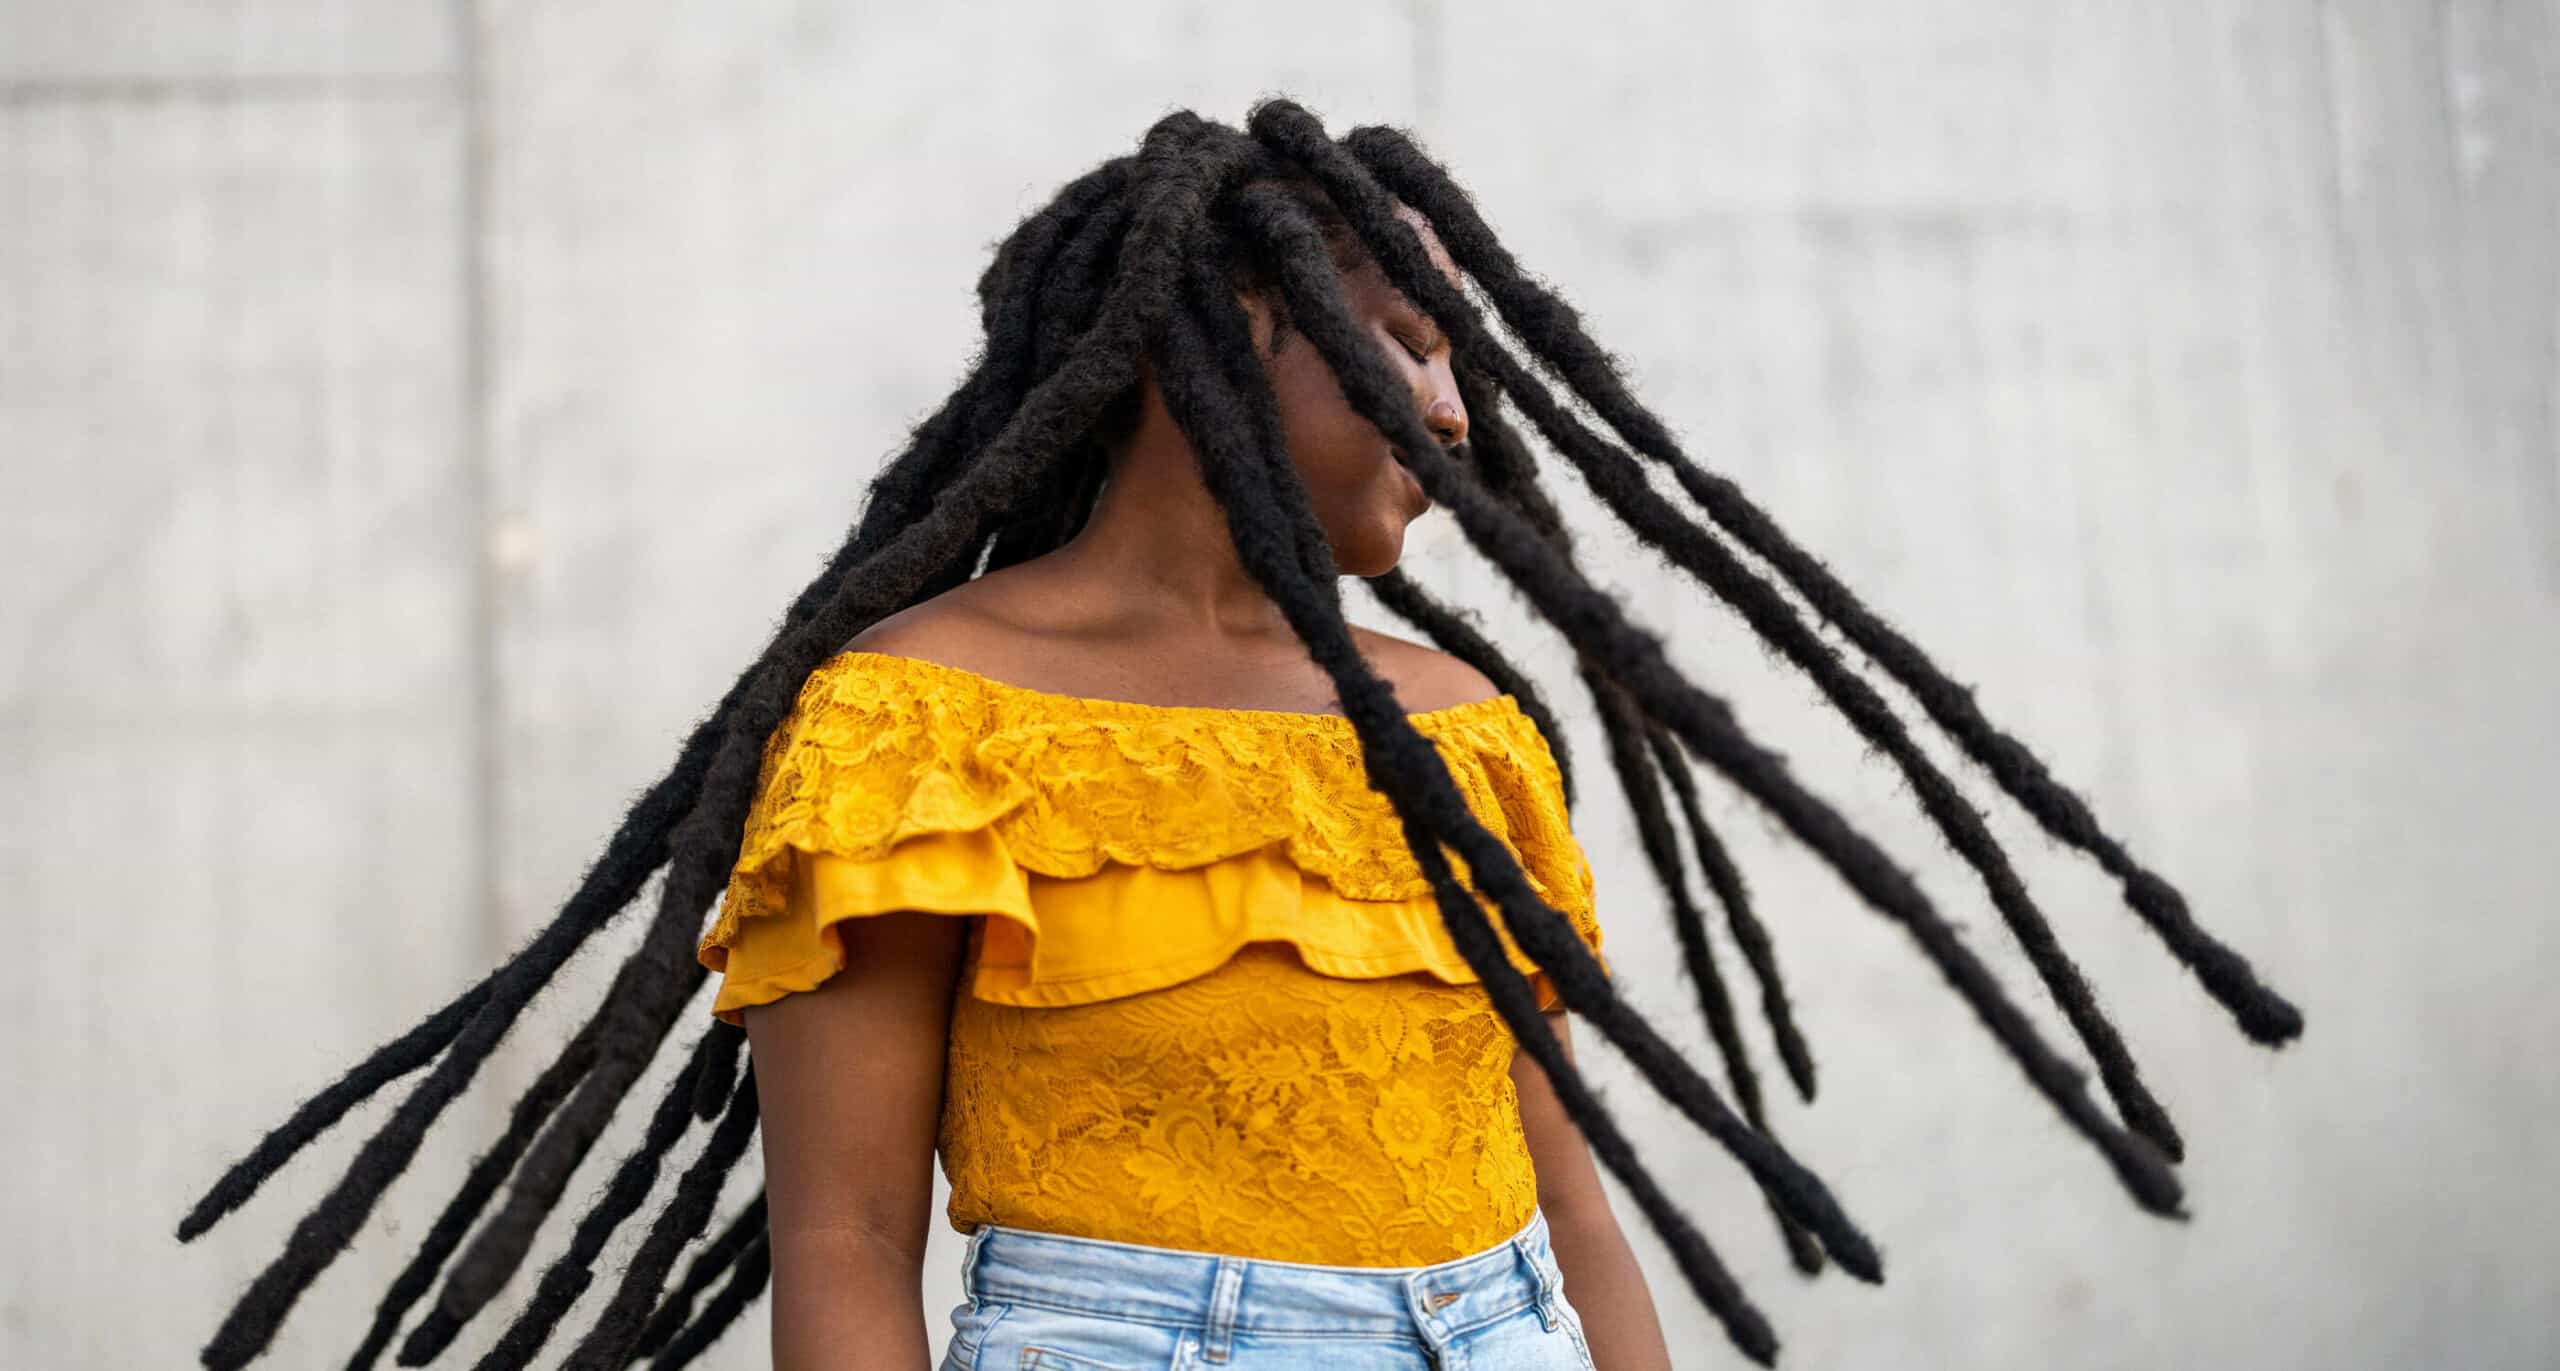 person wearing yellow off-the-shoulder-top and light blue jeans swinging long dreads